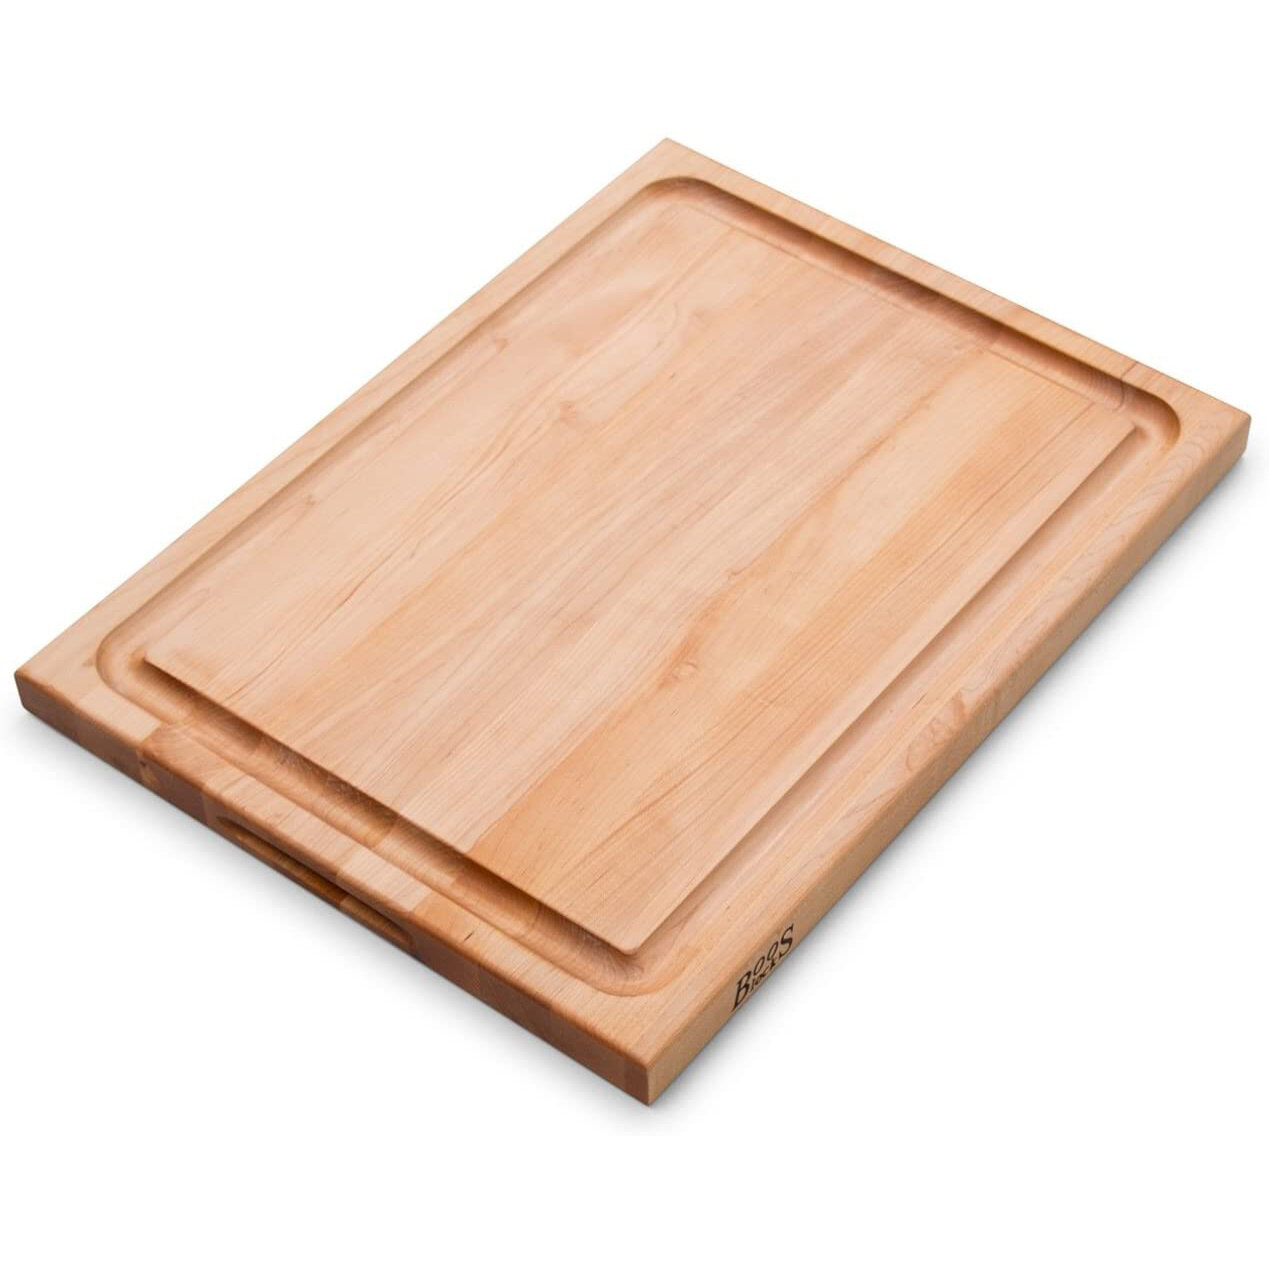 How We Craft Hard Rock Maple Into Premium Cutting Boards